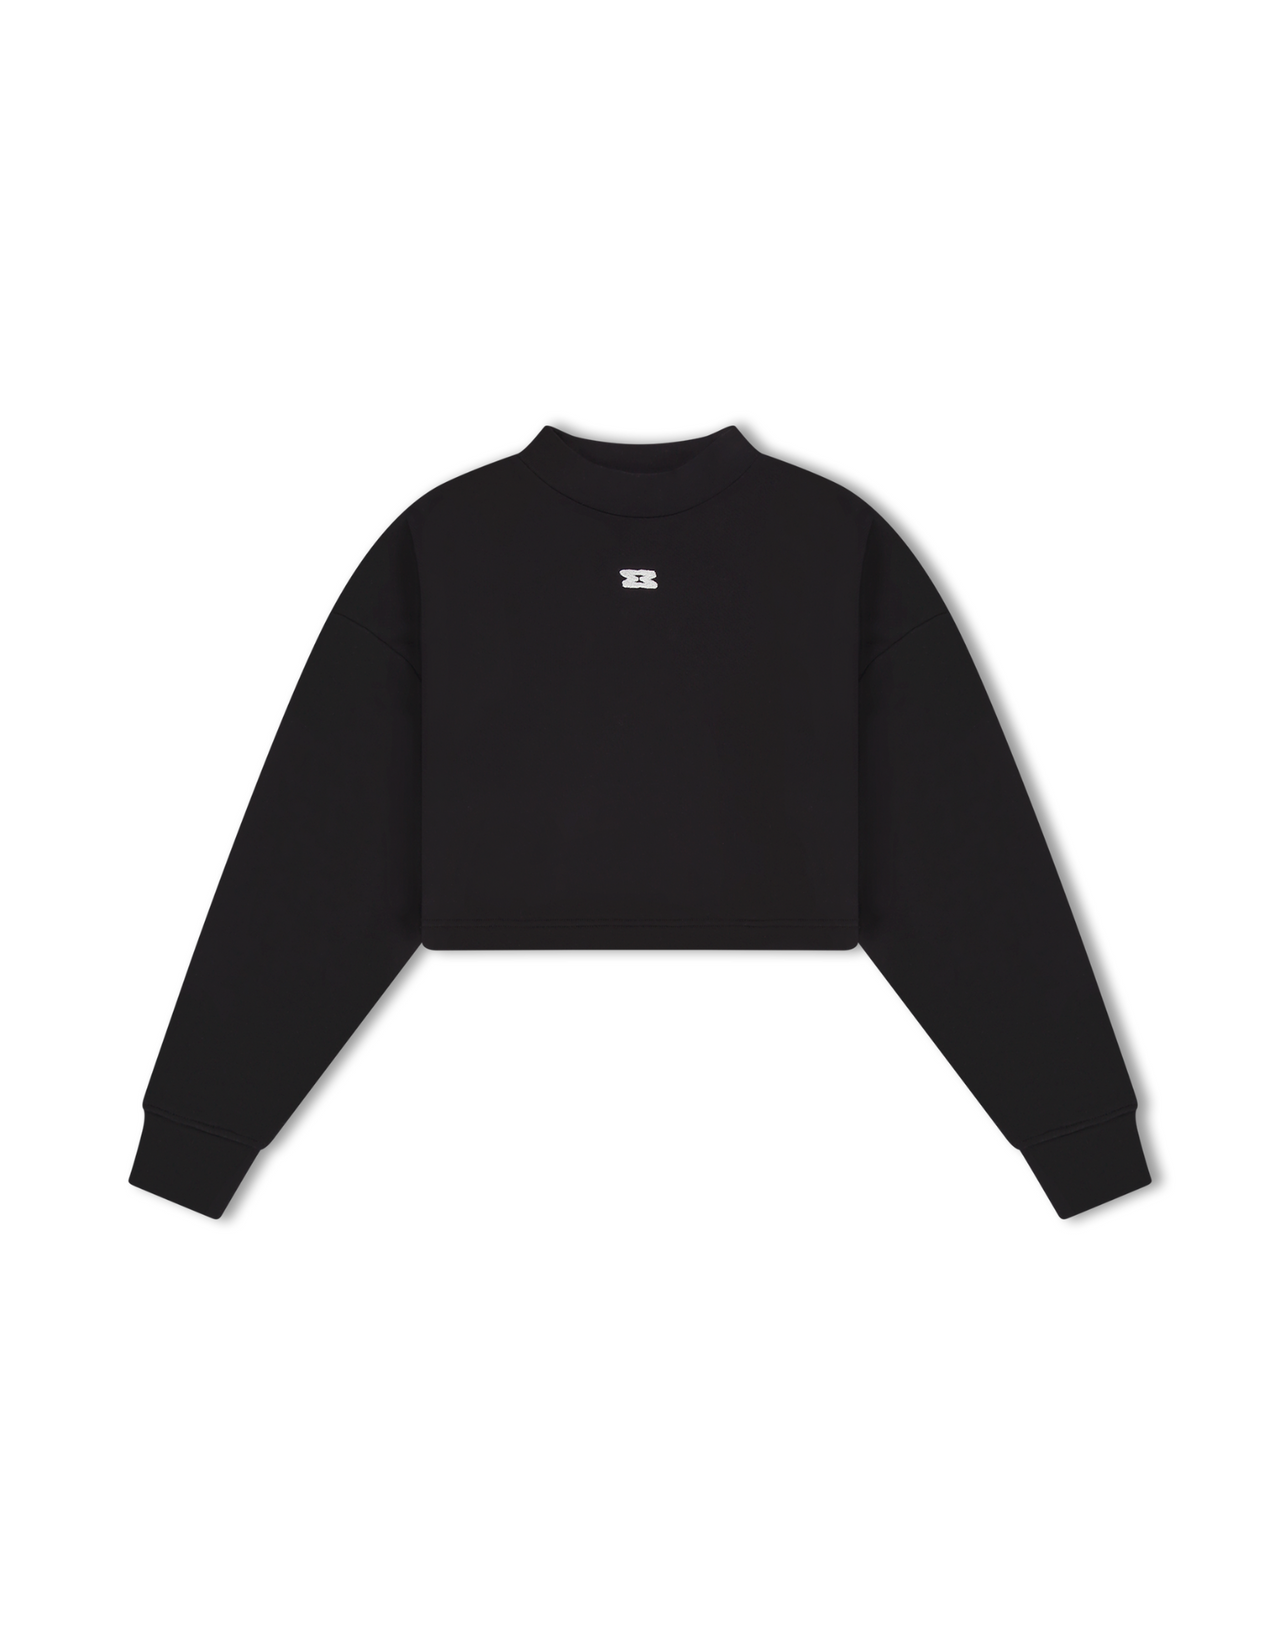 Hourglass sweater cropped black